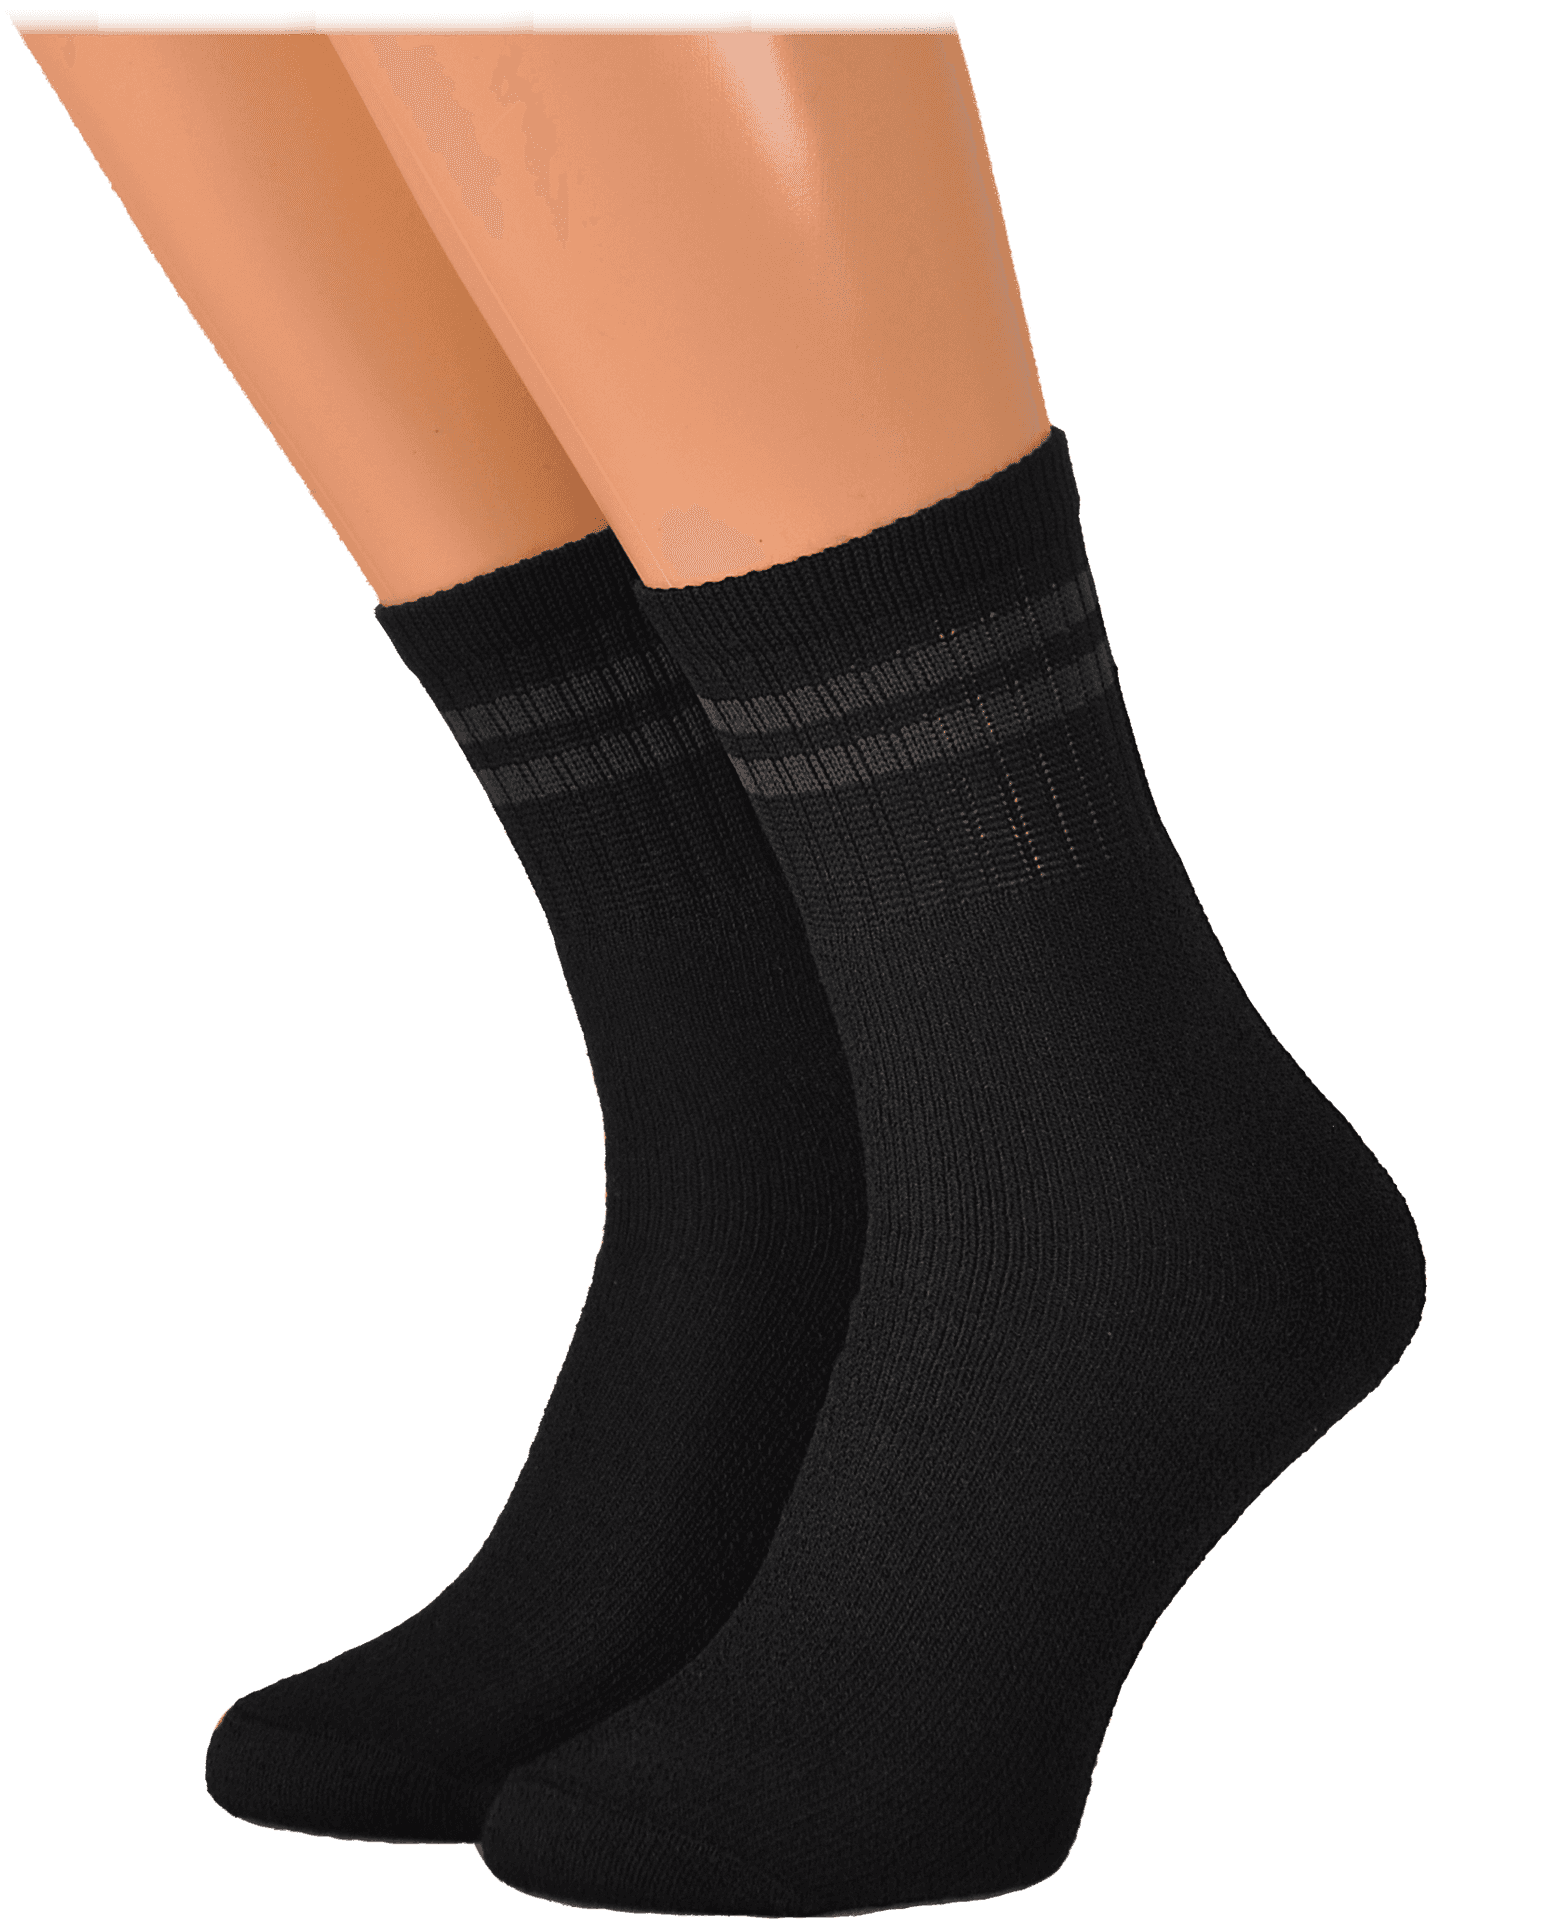 Black Crew Socks Product Photography PNG image